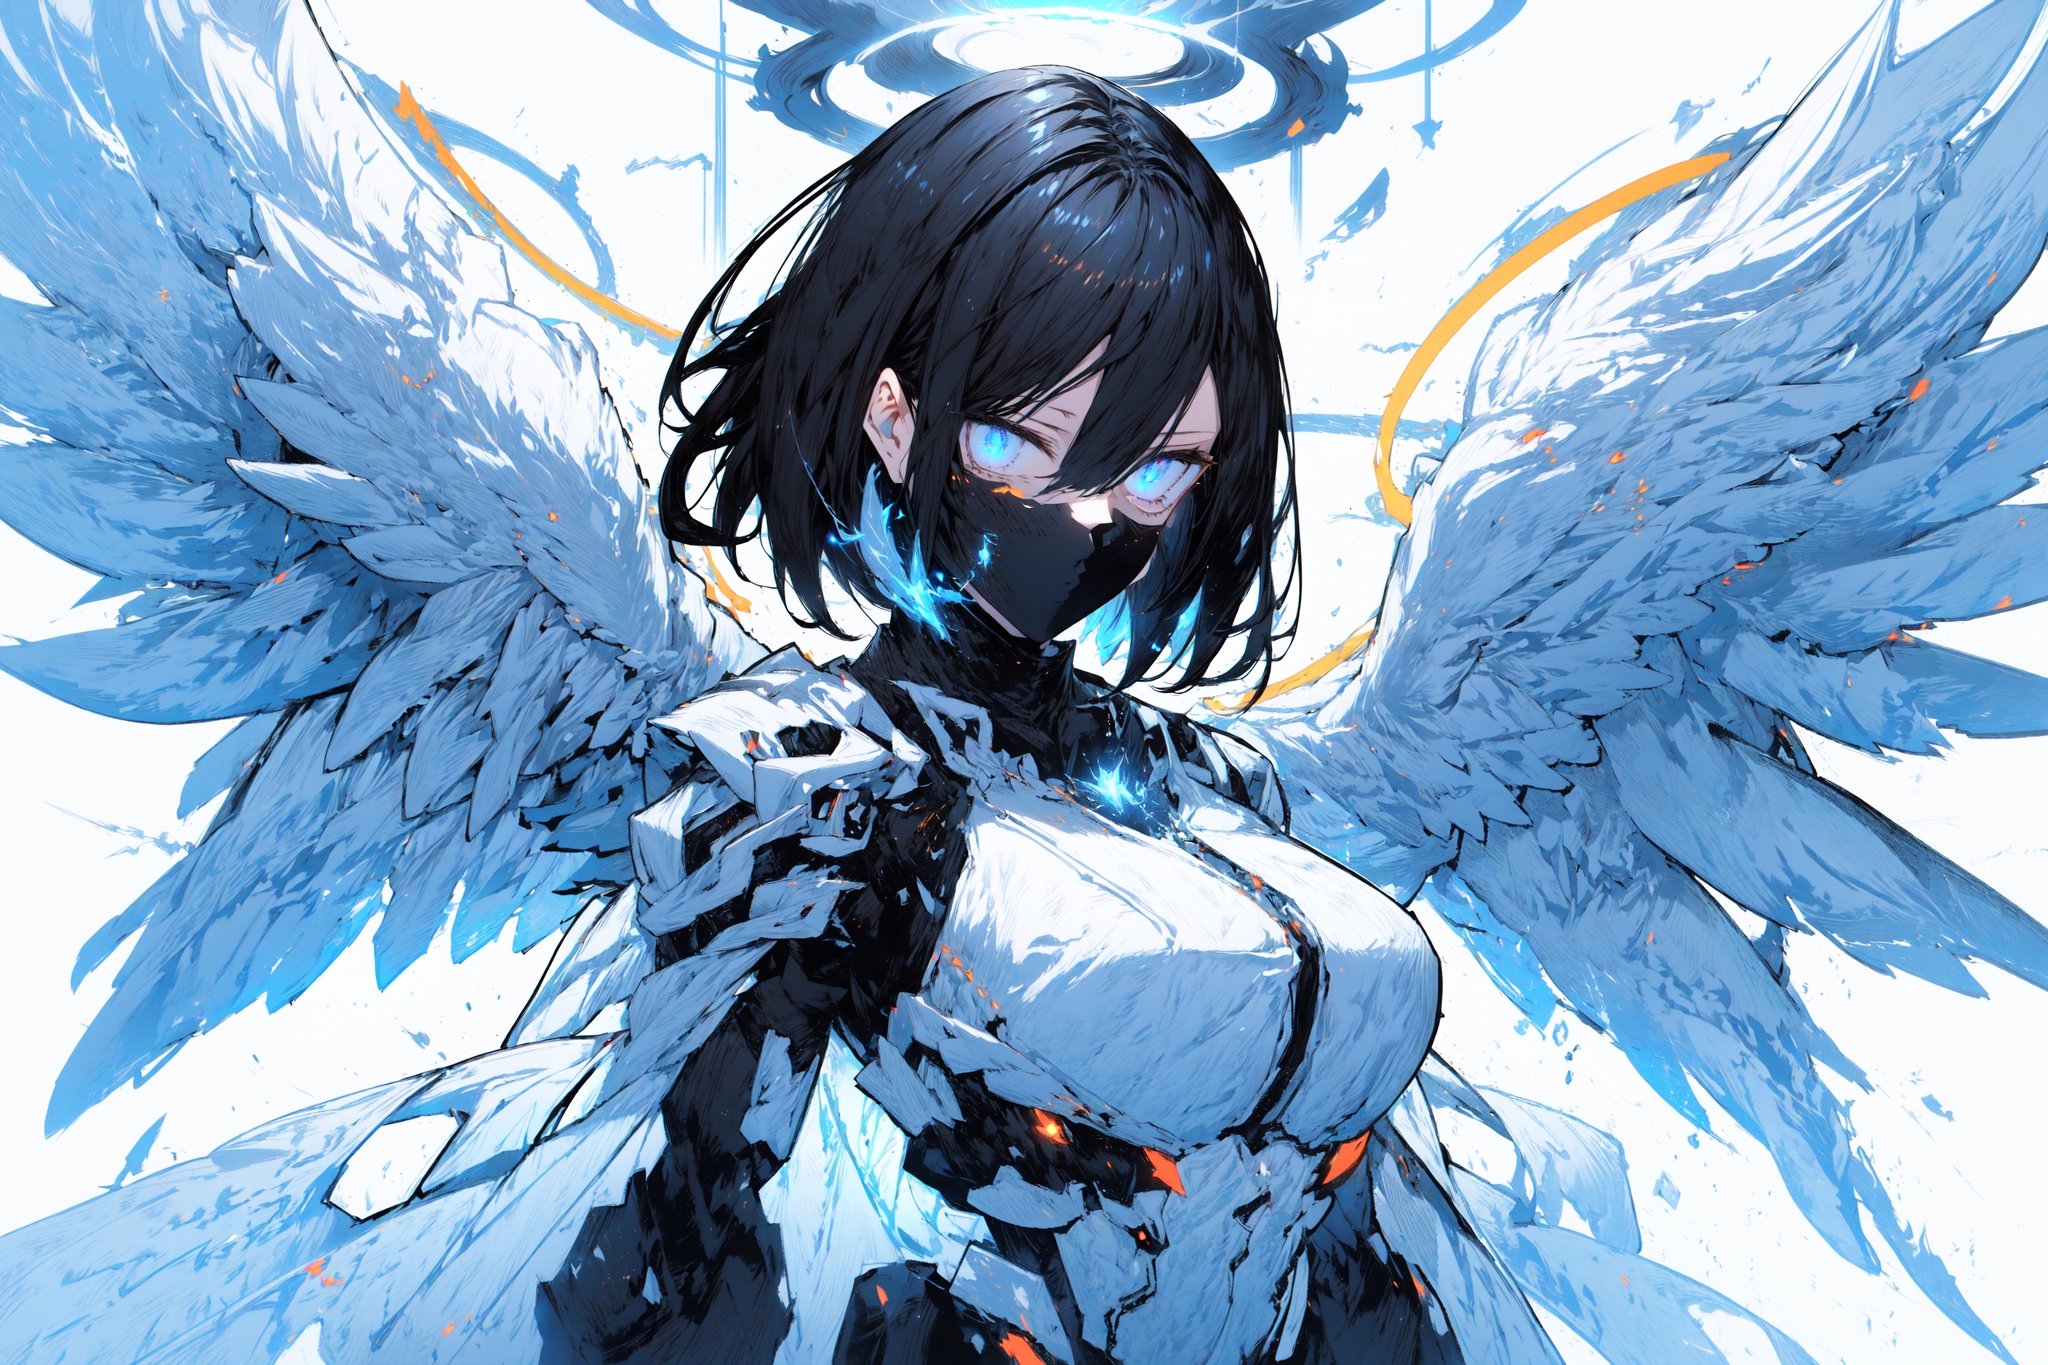 (1girls:1.4), (white_background:1.4), (simple_background:1.4),

dynamic_angle, tyndall effect, volumetric lighting, looking_at_viewer, full_body, bright_theme, niji, clear_lines

short-hair, black-hair, Pale_skin, big_breasts, sharp_face, multicolored_eye, angelic angel, eyeshadow, eyeliner, Eyelash, from_side, expressive eyes, perfect blue glowing_eyes, cyberpunk, bright angelic mecha armor, determined_face, damaged, glowing around body, aura, energy, beam, white plugsuits, white exoskeleton suit, tall, halo, holyness, energy wings, blue_eyes, white clothing, mecha mask, abs

(best quality:1.4), (highres:1.4), (high_resolution:1.4), (masterpiece:1.4), sidelighting, super detail, hyper detail, intricate_details, ligne_claire, perpect face,midjourney,fantasy00d